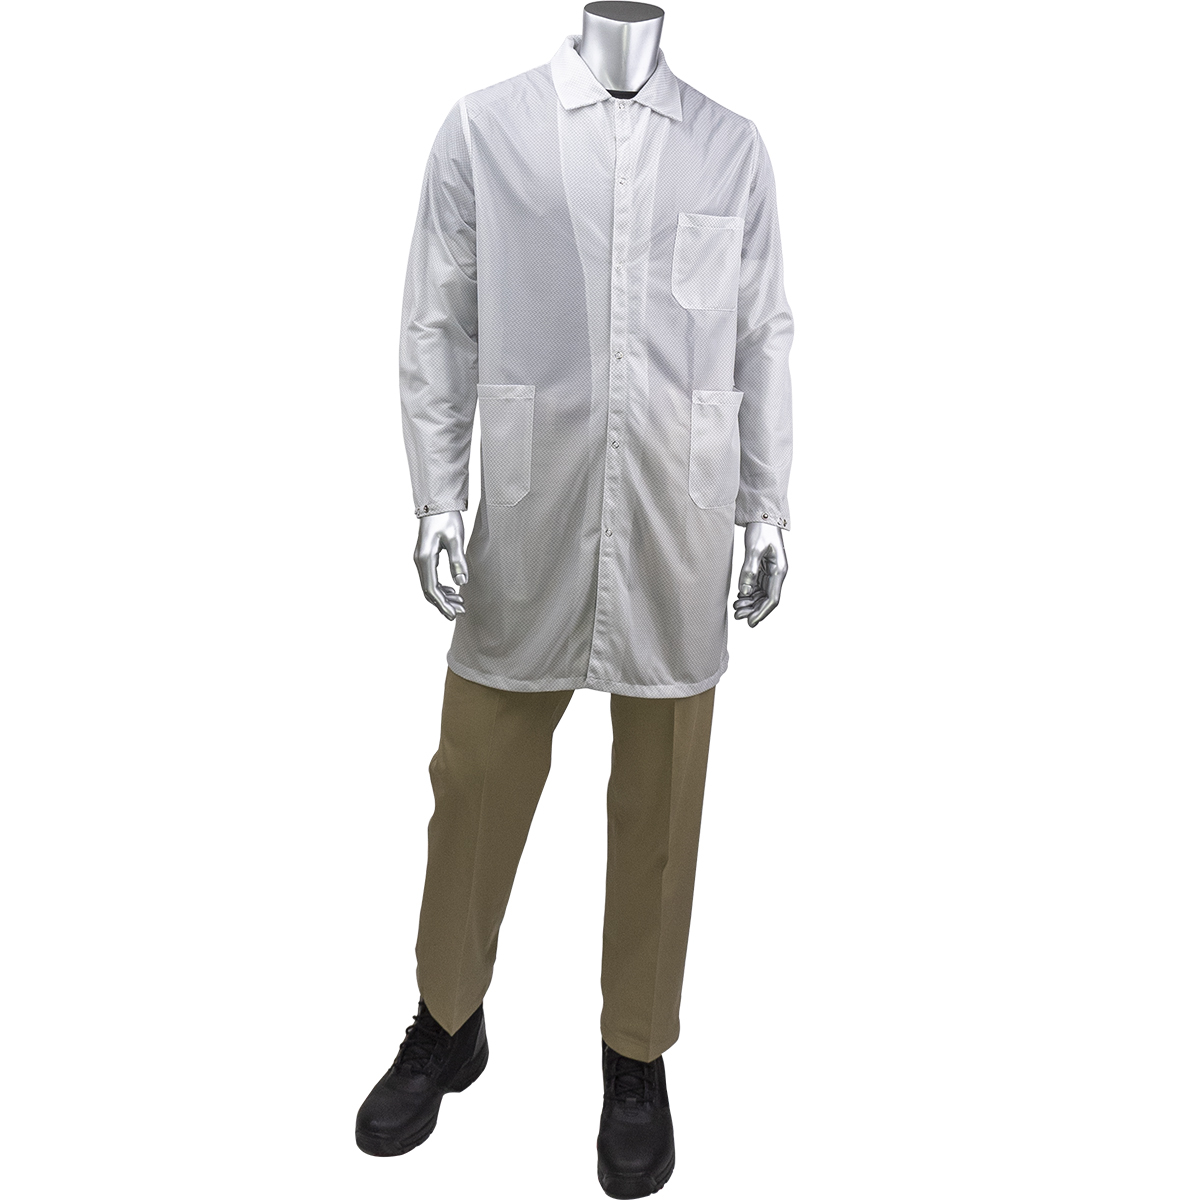 BR51C-47WH PIP® Uniform Technology™ StatStar Long ESD Labcoats with ESD Knit Cuffs, White